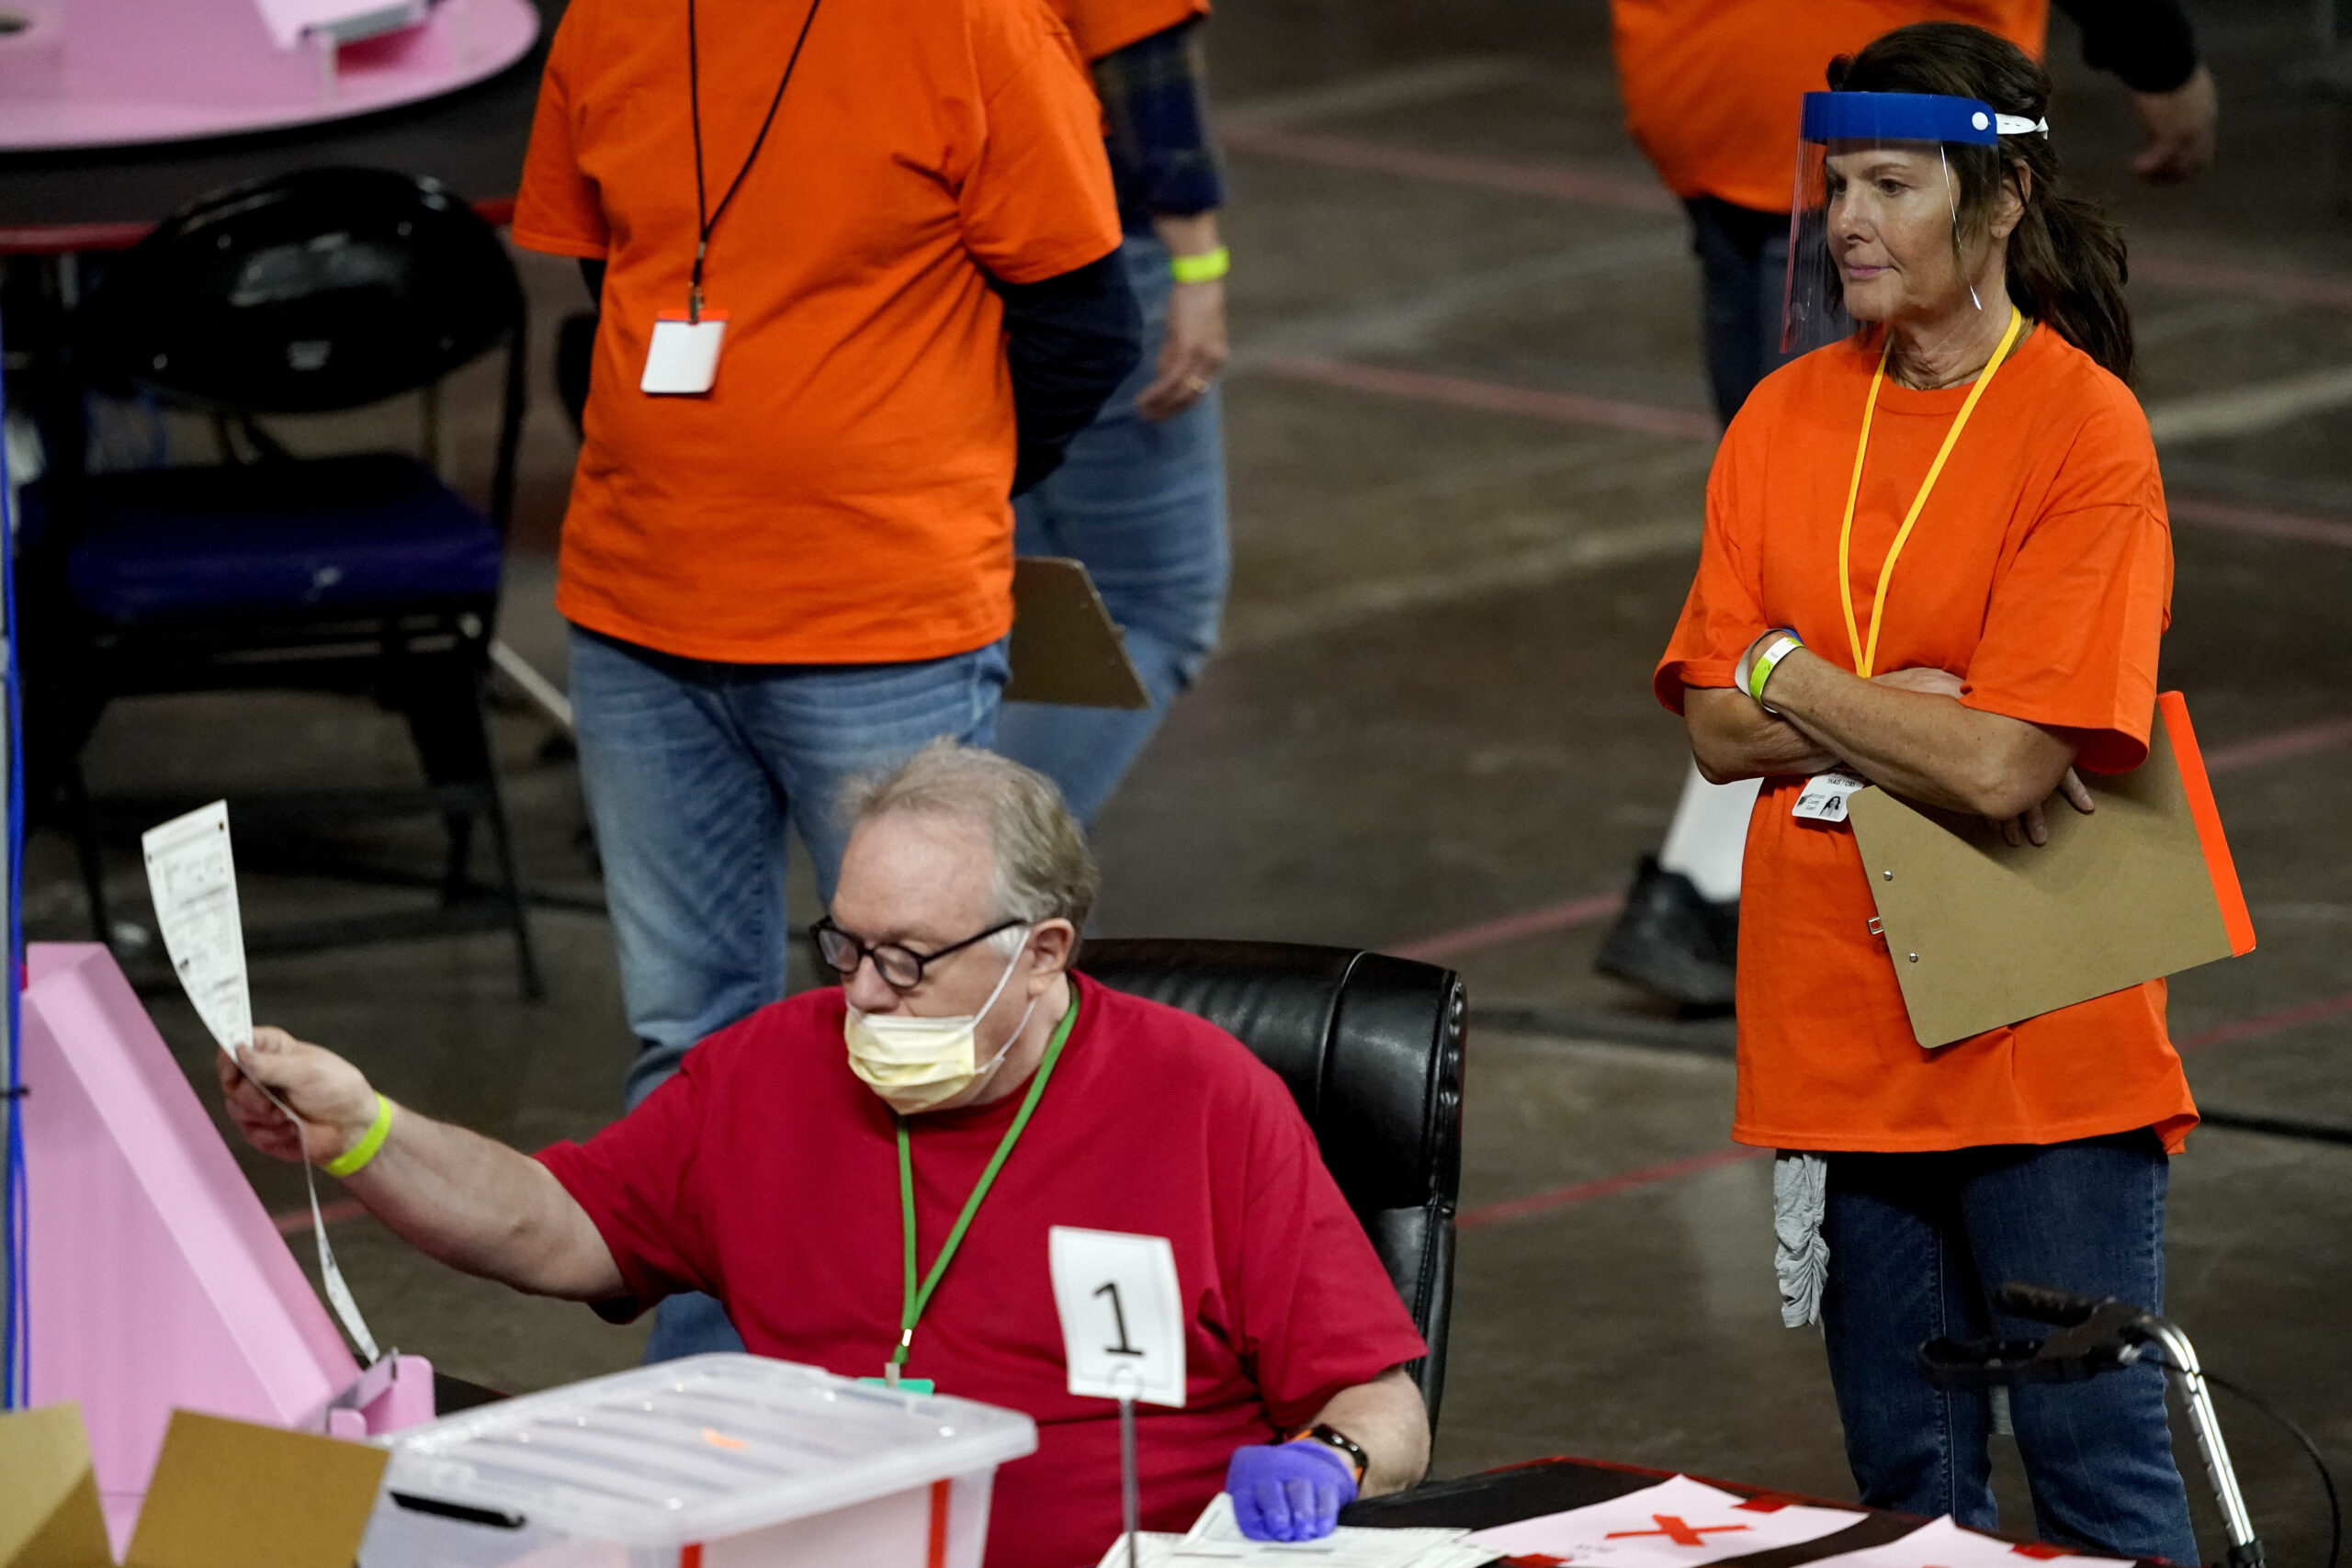 A photo of workers hand counting ballots in Arizona